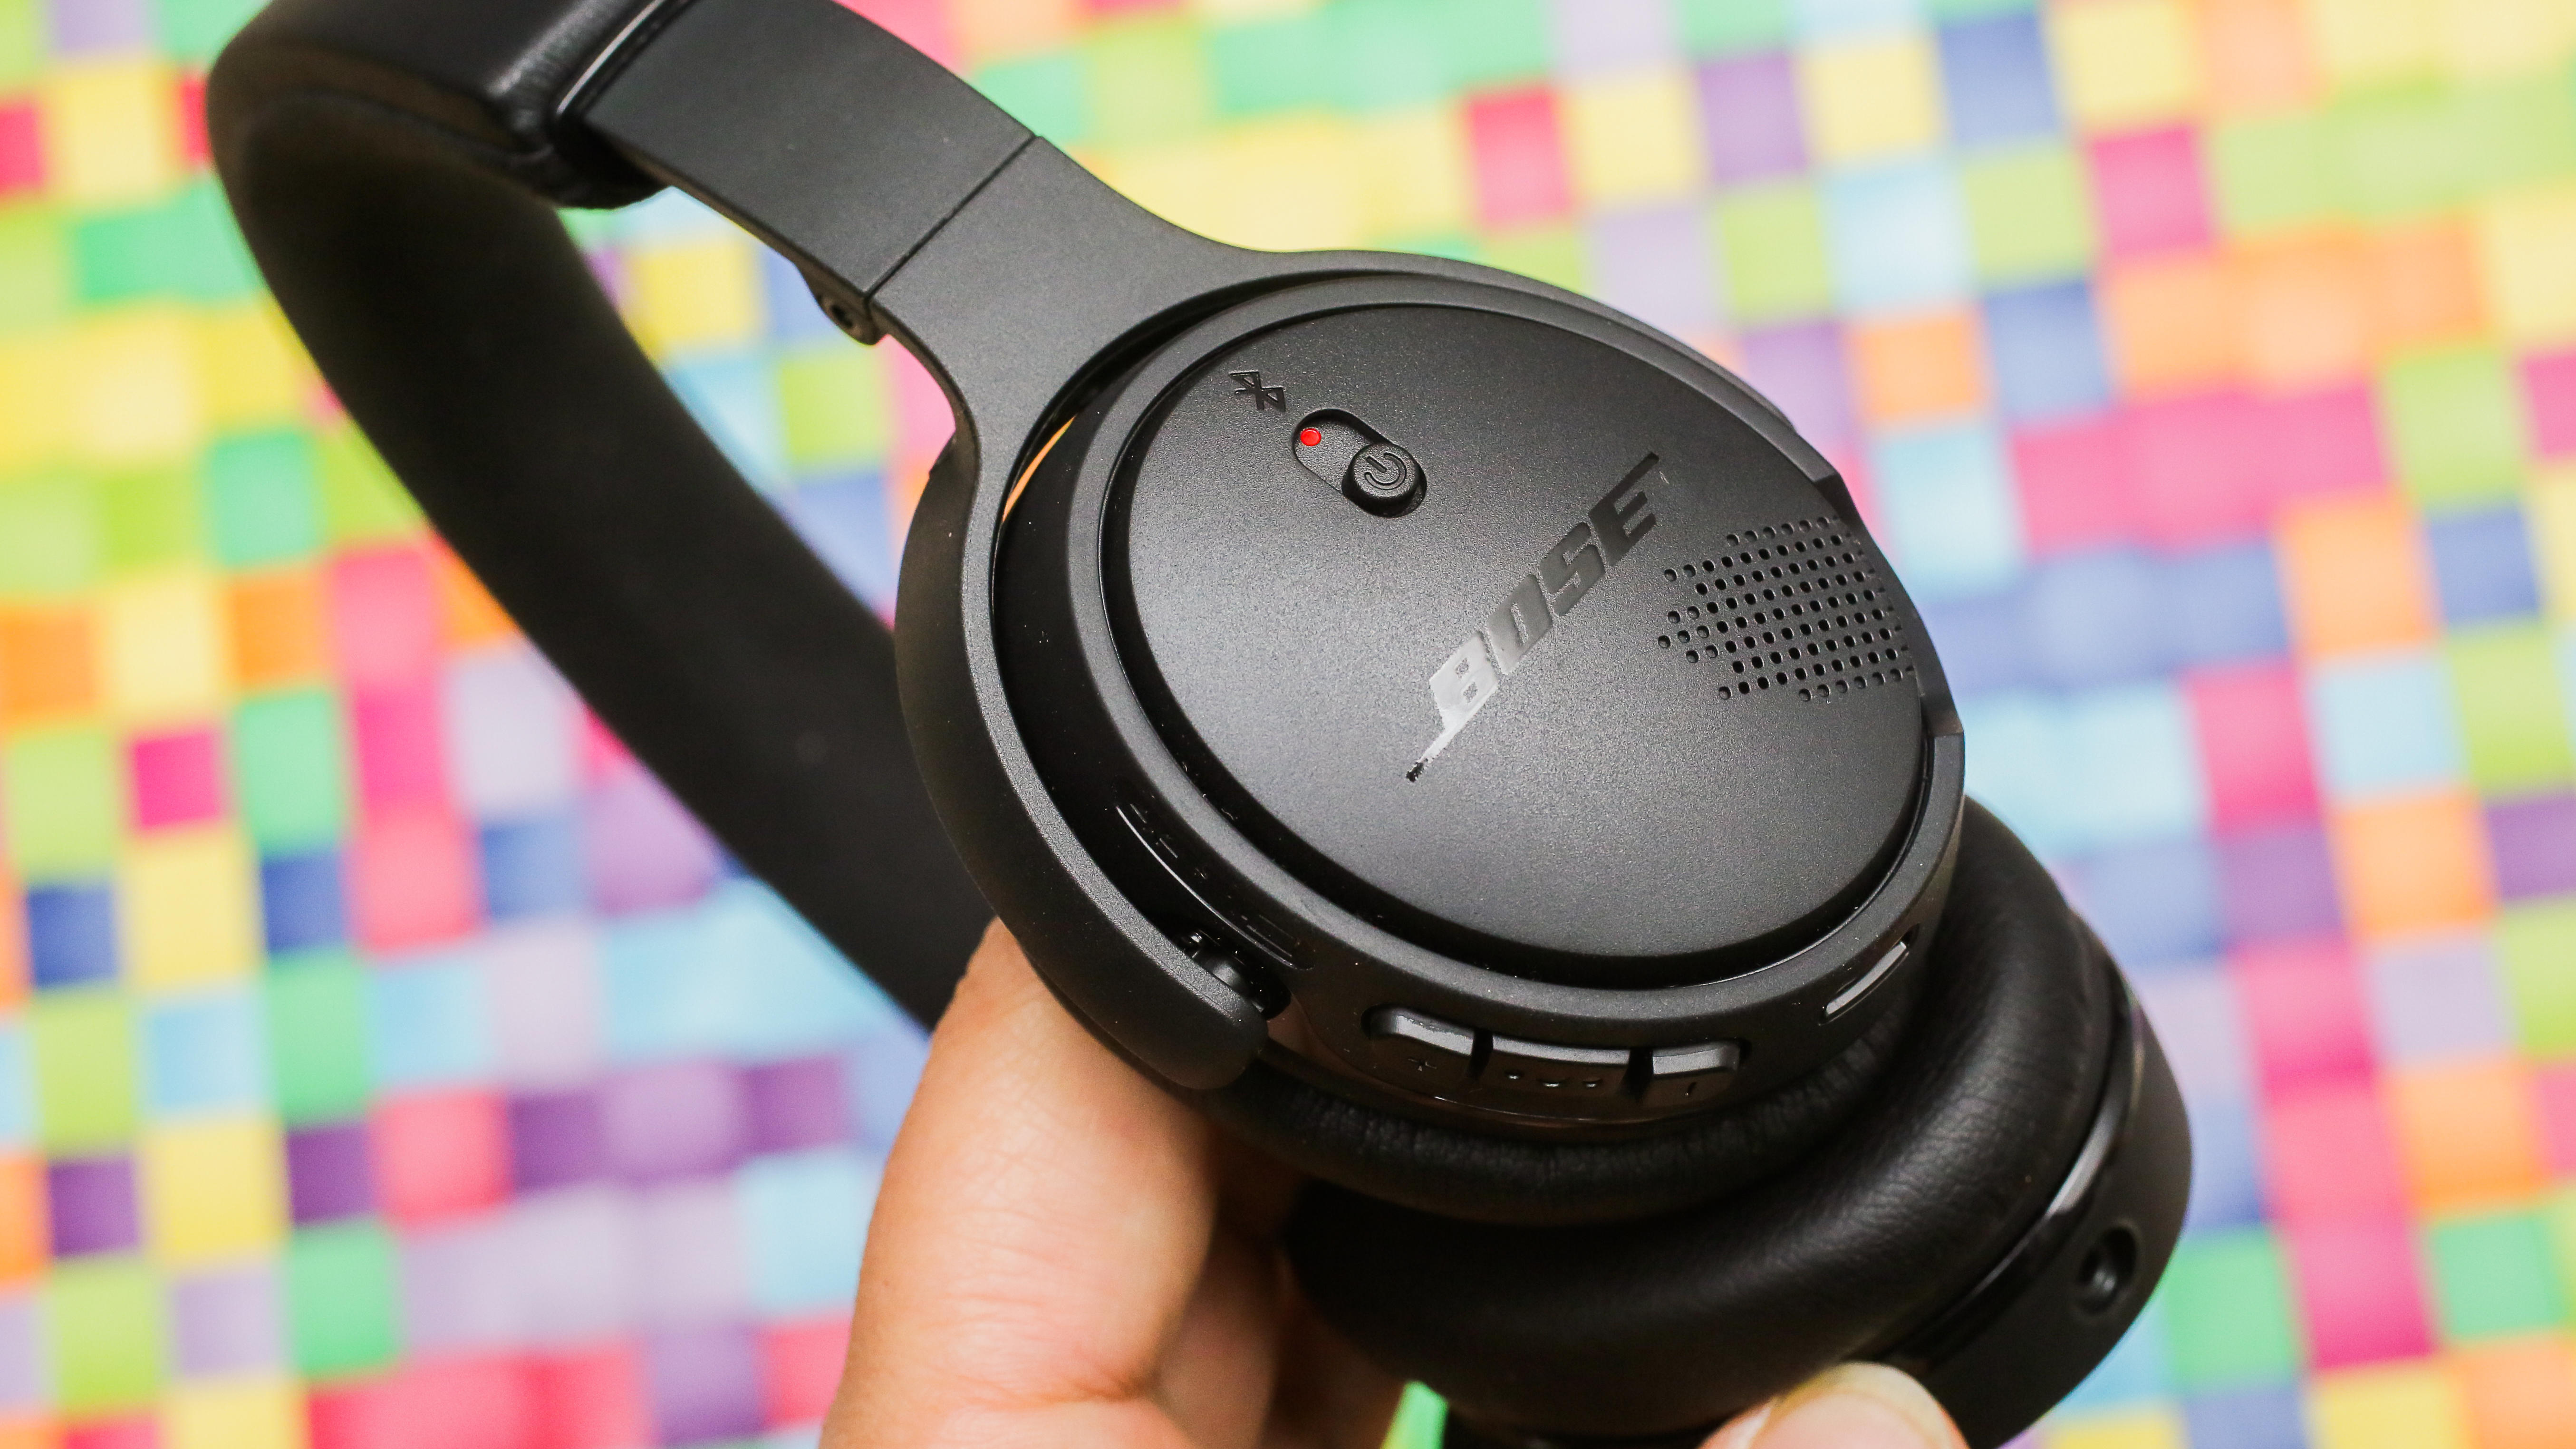 Best Cyber Monday headphone deals: Bose QC 25 for $109, JBL, Beats and more  from $25 - CNET